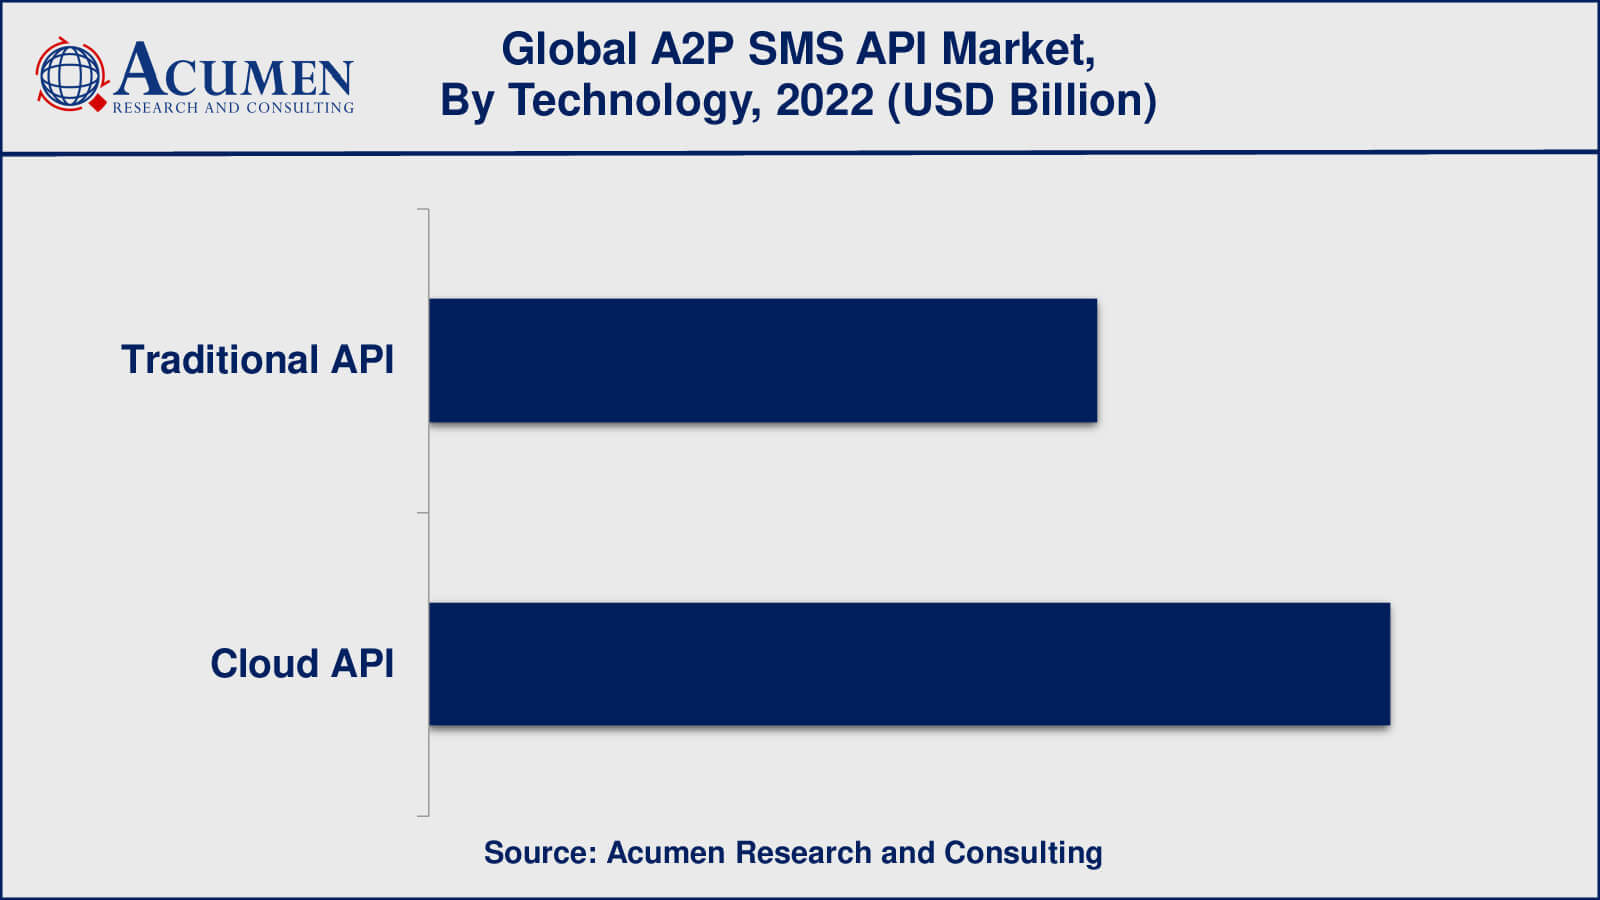 A2P SMS API Market Opportunities